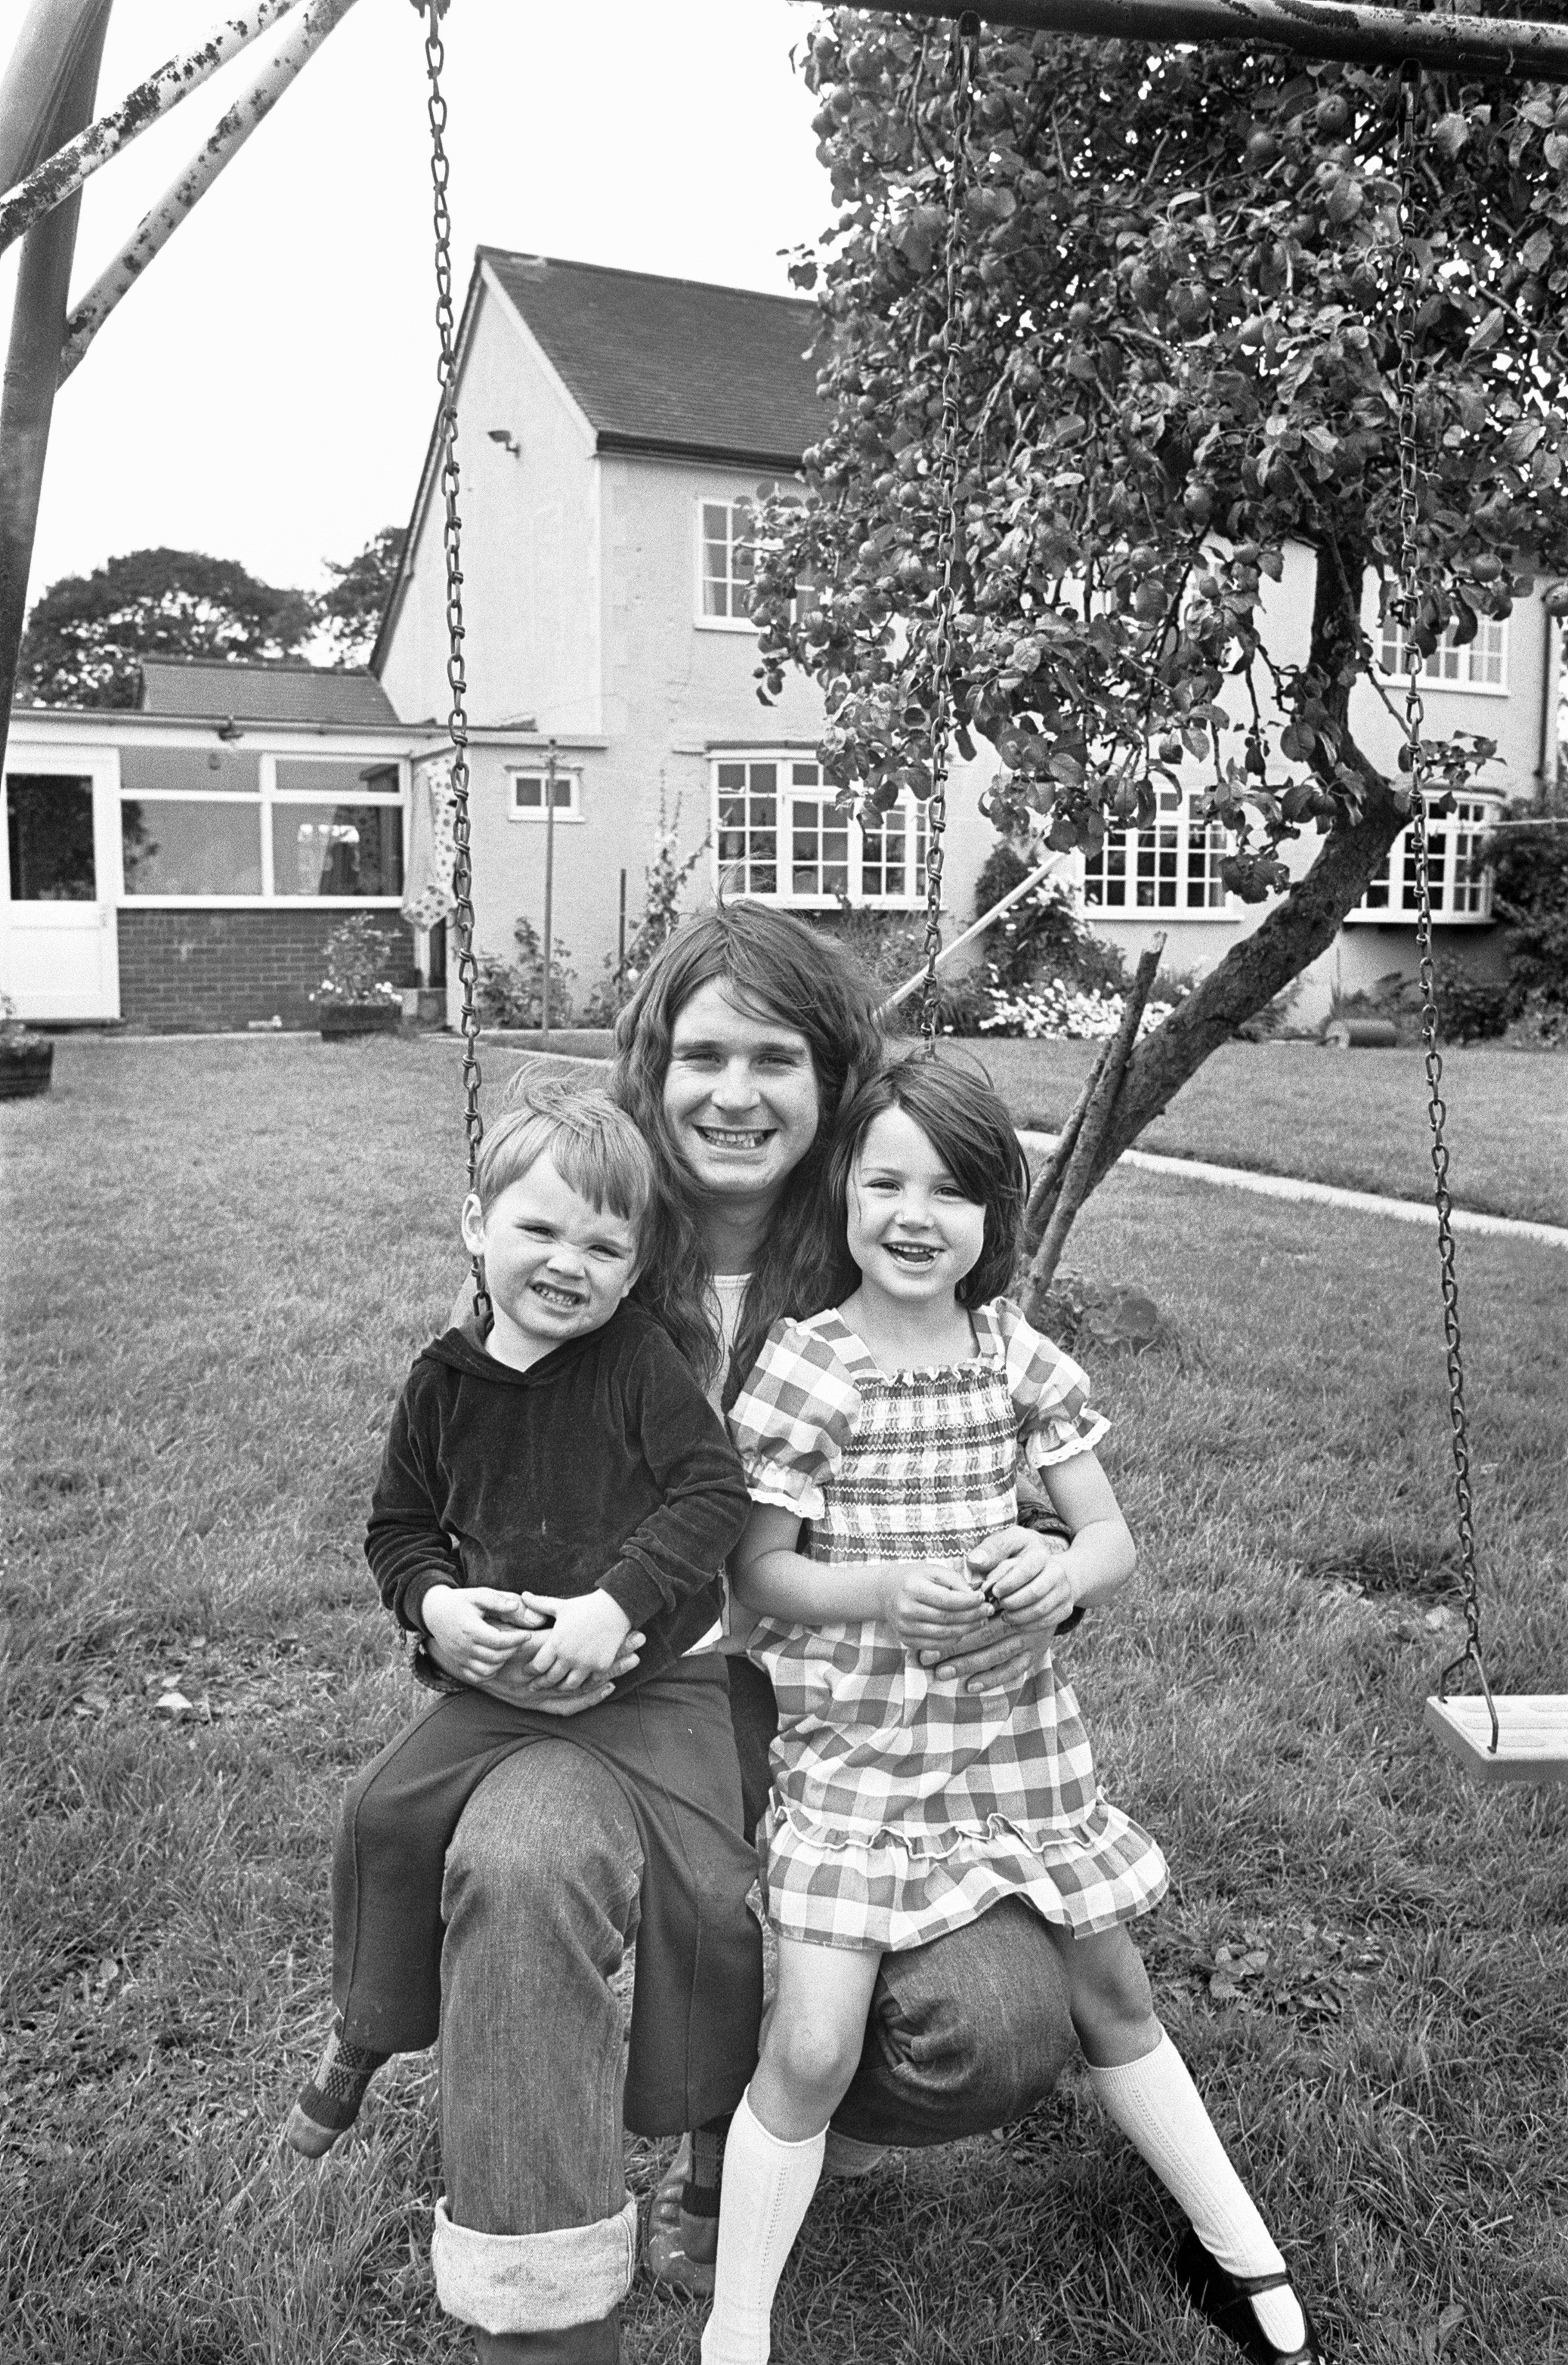 Ozzy Osbourne with Jessica and Louis Osbourne on August 19, 1978. | Source: Getty Images